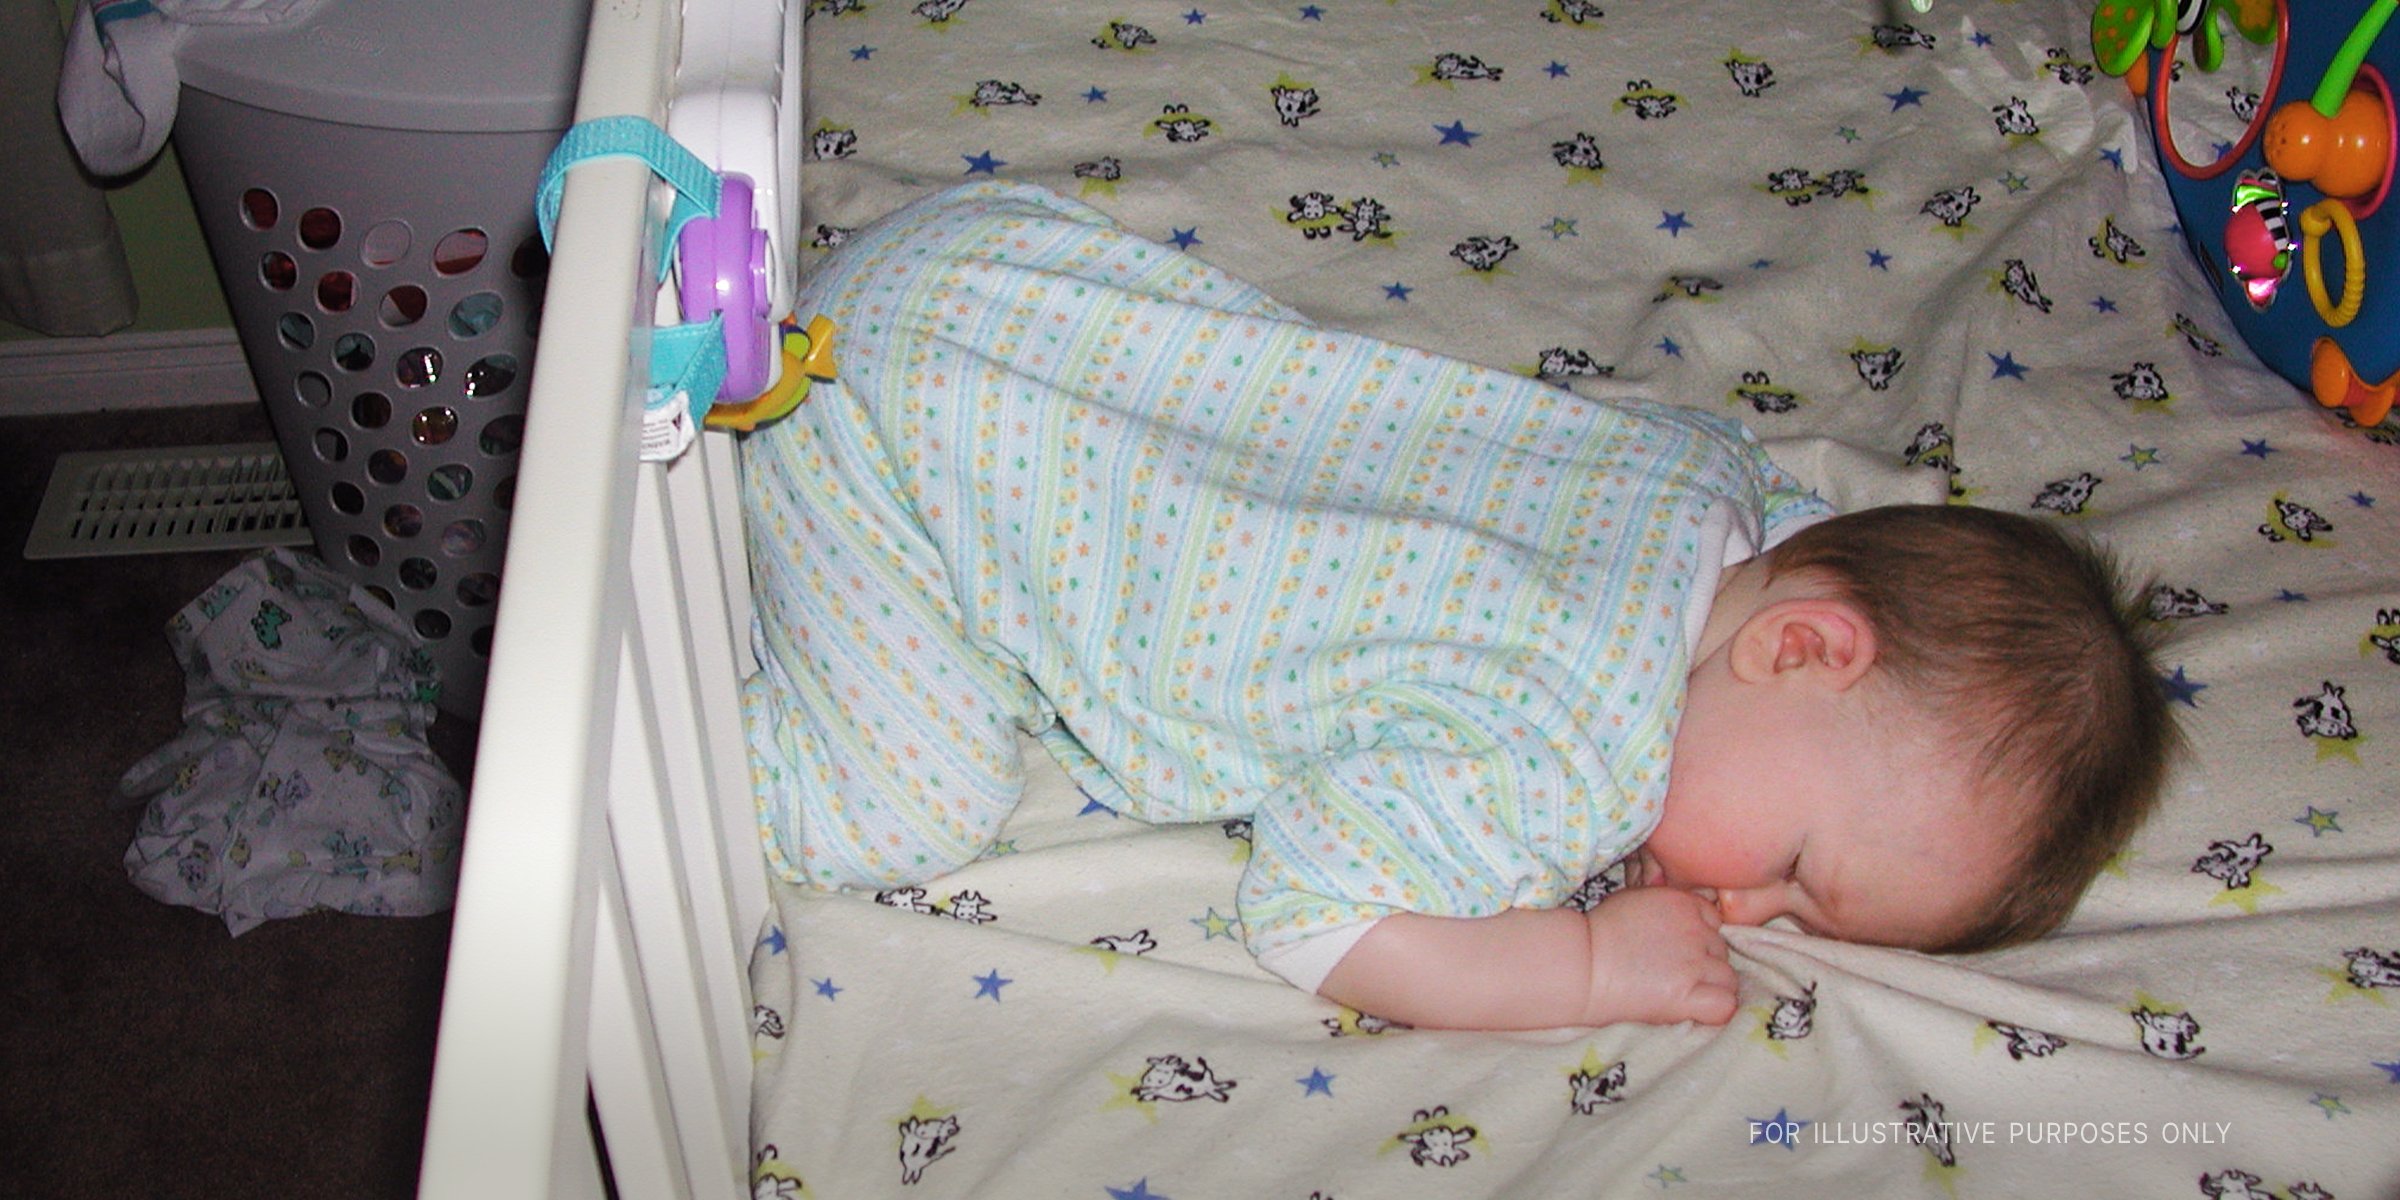 A baby sleeping on a bed | Source: Flickr/DNAMichaud (CC BY 2.0)